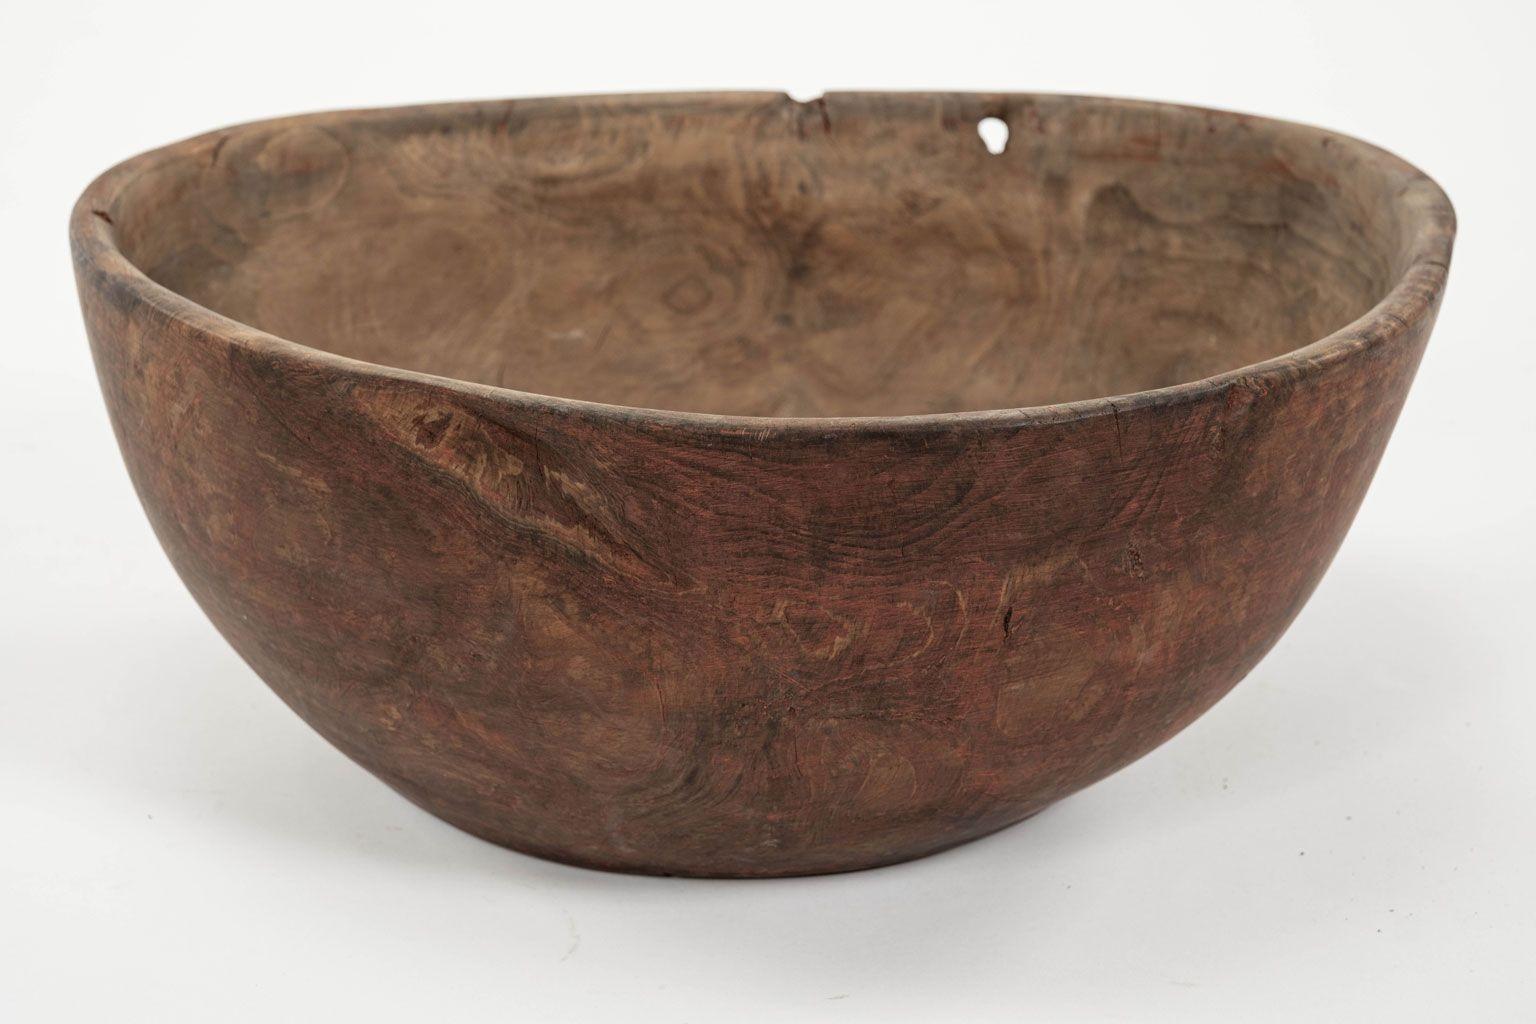 Primitive Swedish Burl Root Wood Dugout Bowl with Traces of Exterior Red Paint In Fair Condition For Sale In Houston, TX